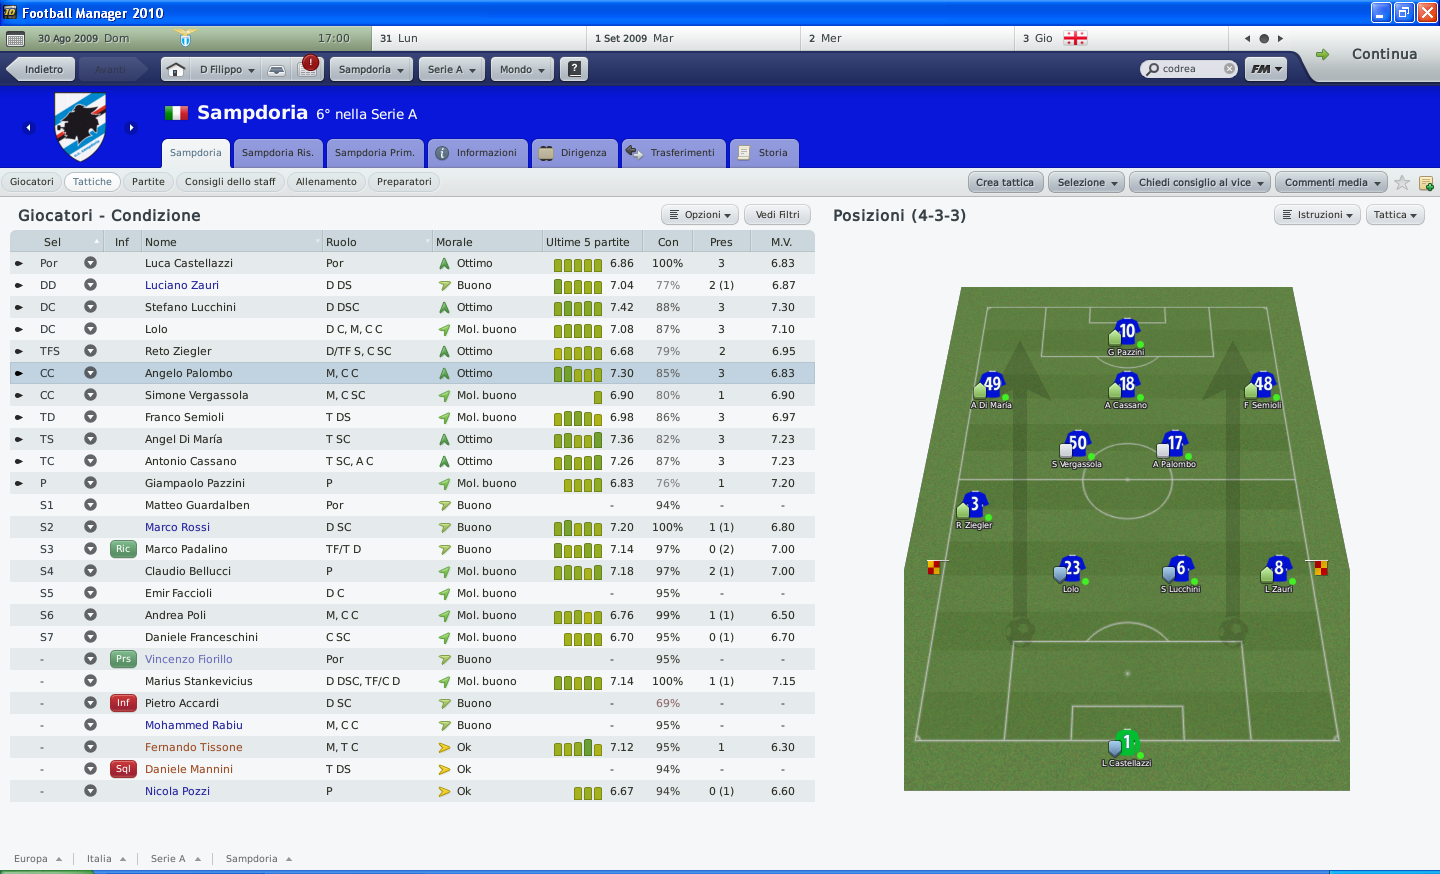 Football manager 2014 download free full version pc crack